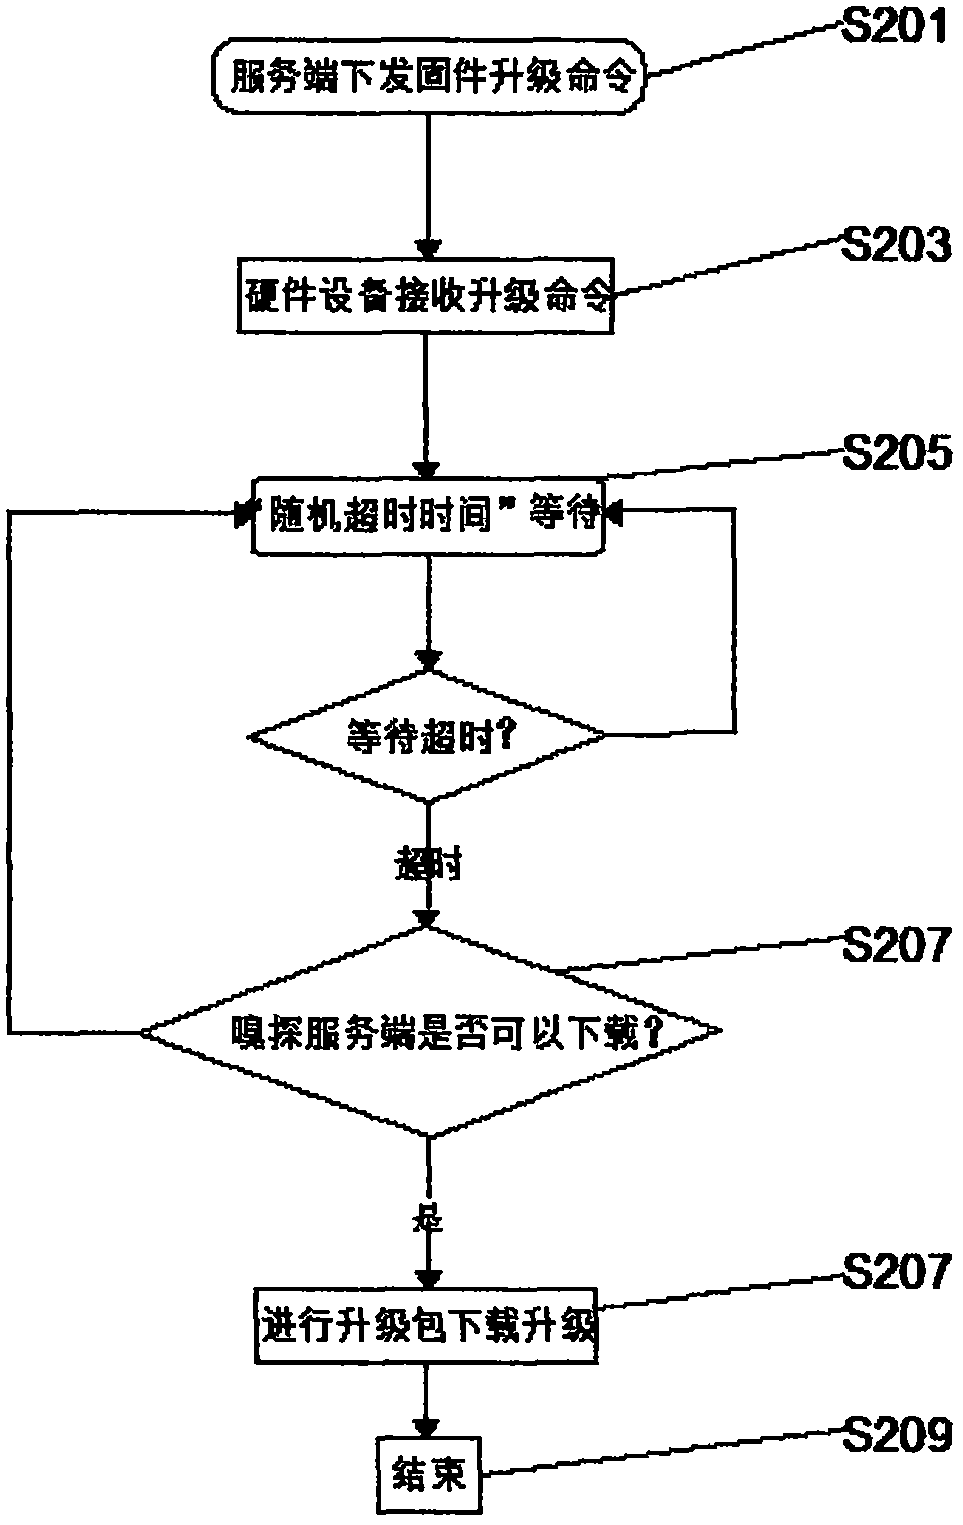 Hardware equipment information processing method and query method